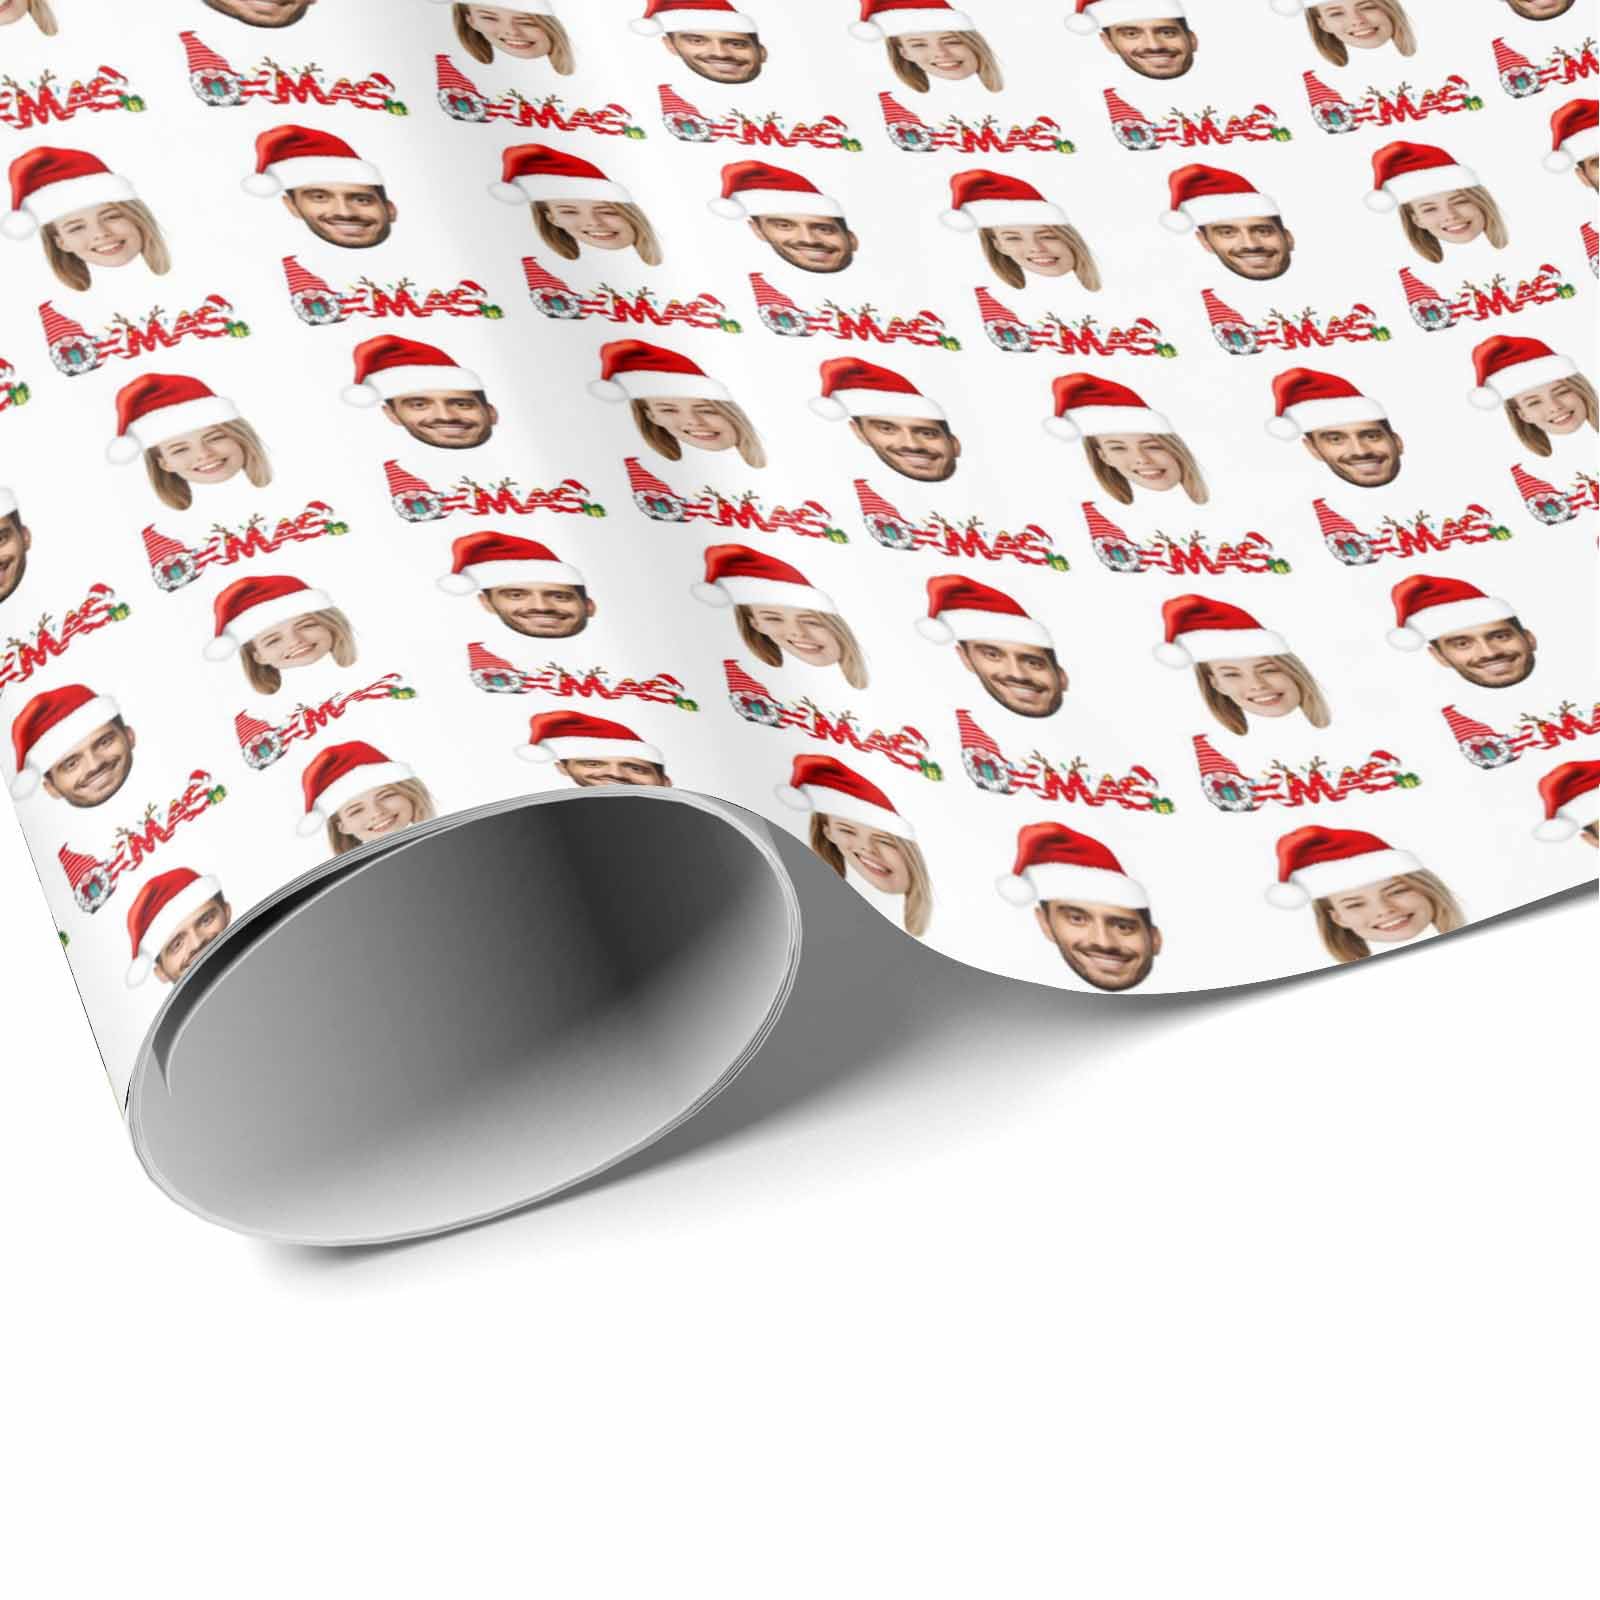 MyPupSocks Personalized Wrapping Paper for Christmas, Wrap Paper with Photo, Custom Picture Winter Holiday Wrapping Paper Roll for Boys Girls Kids Festival Winter Holiday 58x23